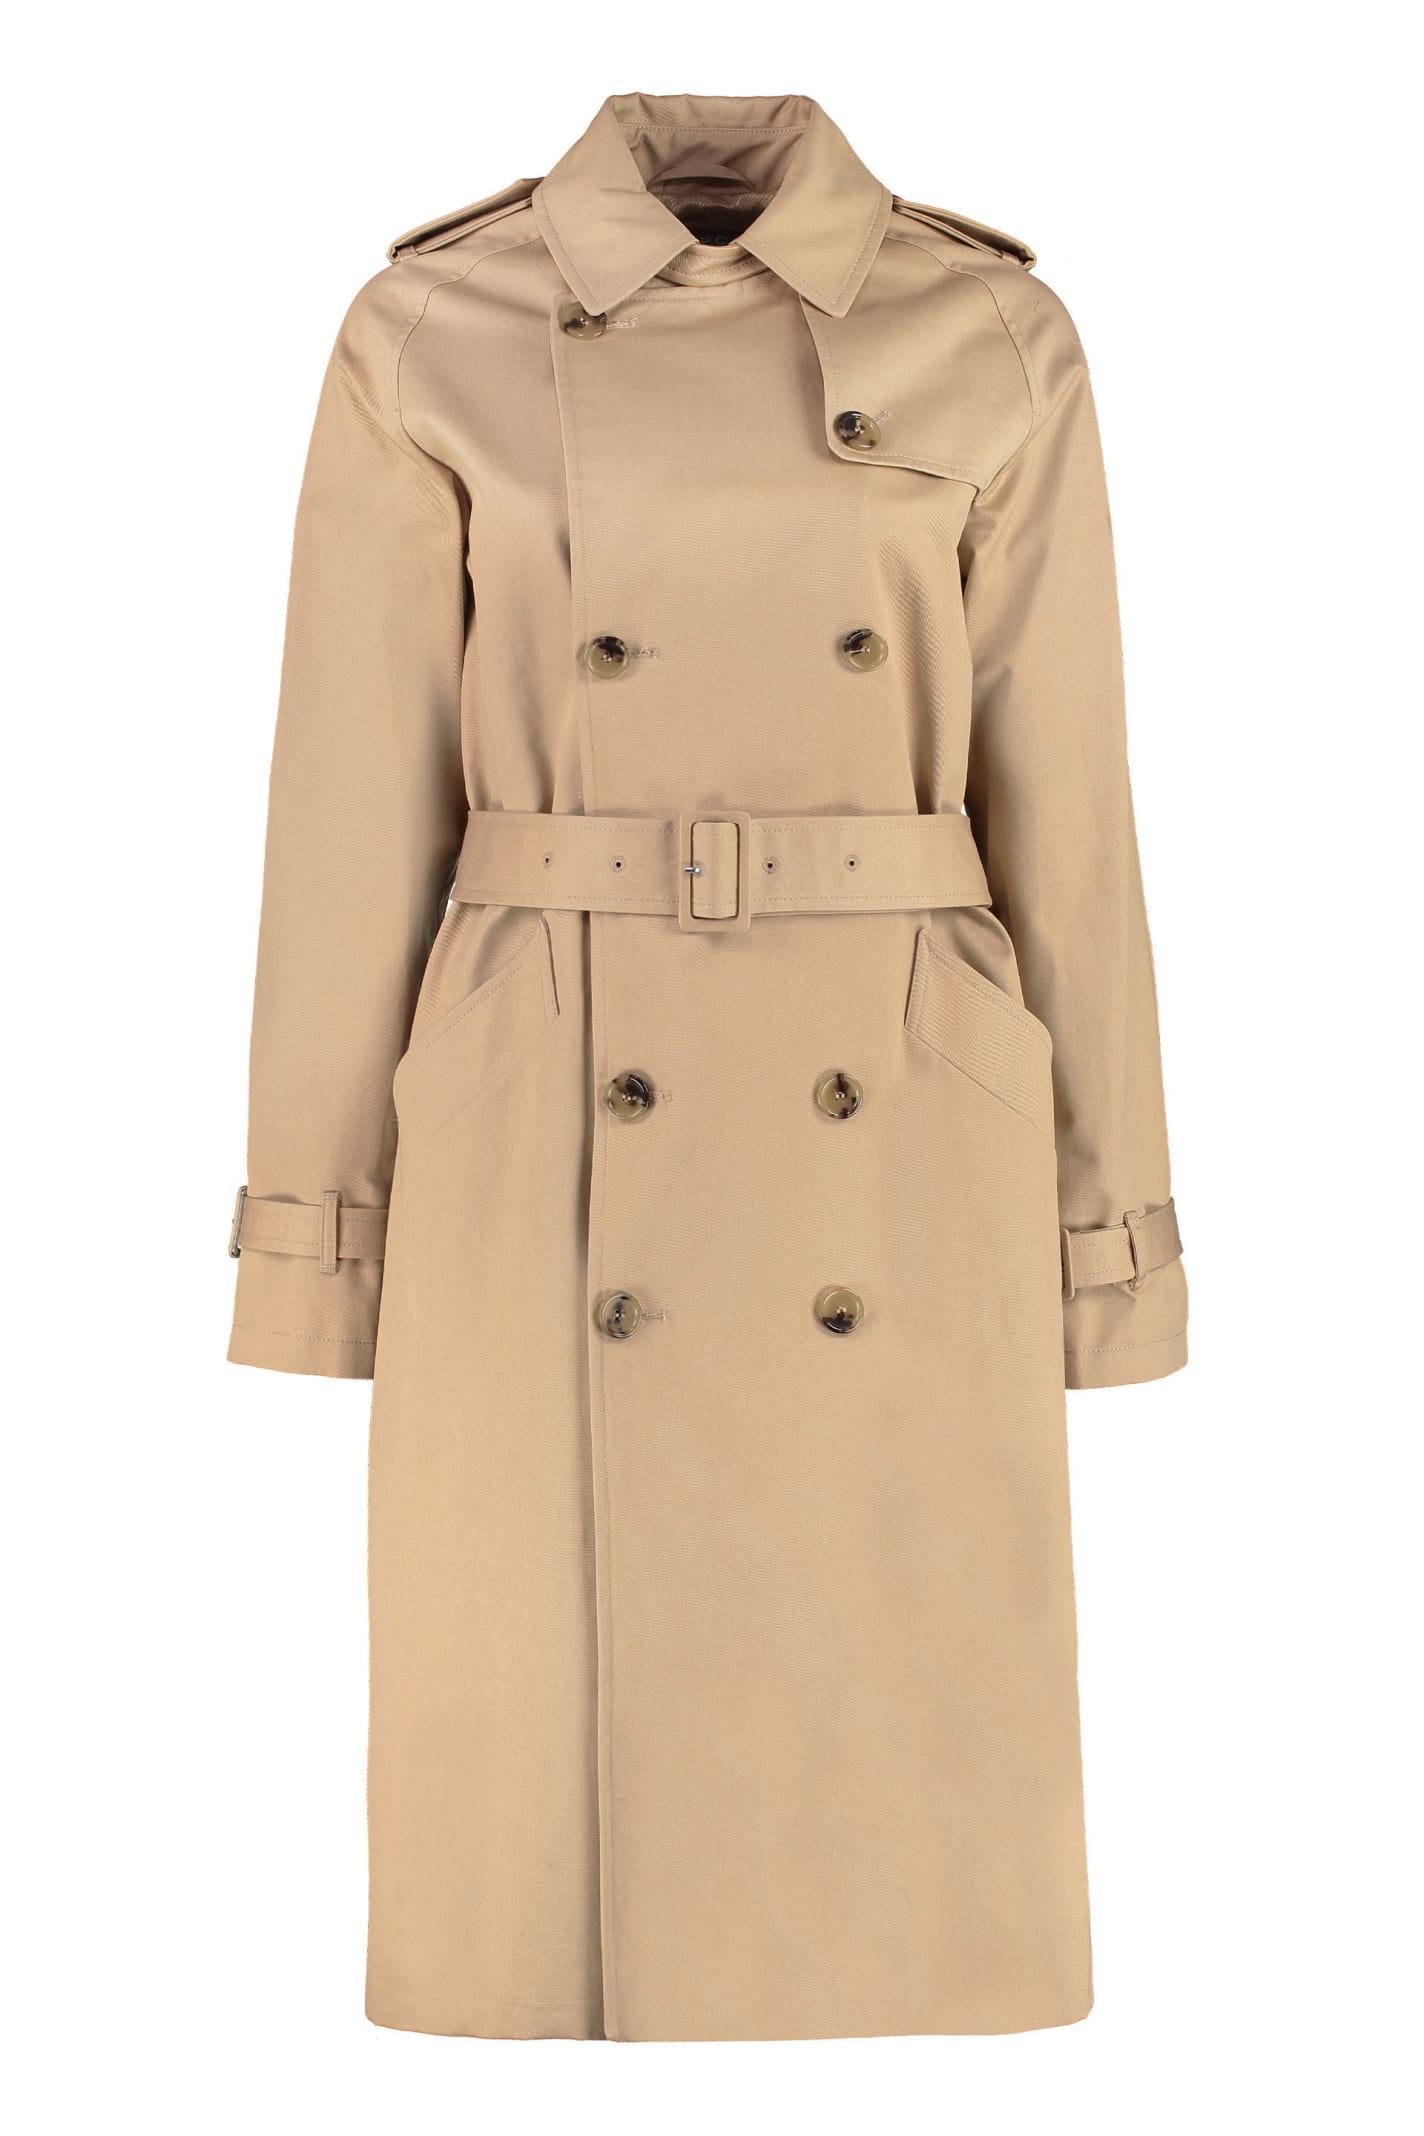 A.P.C. Greta Double-breasted Trench Coat